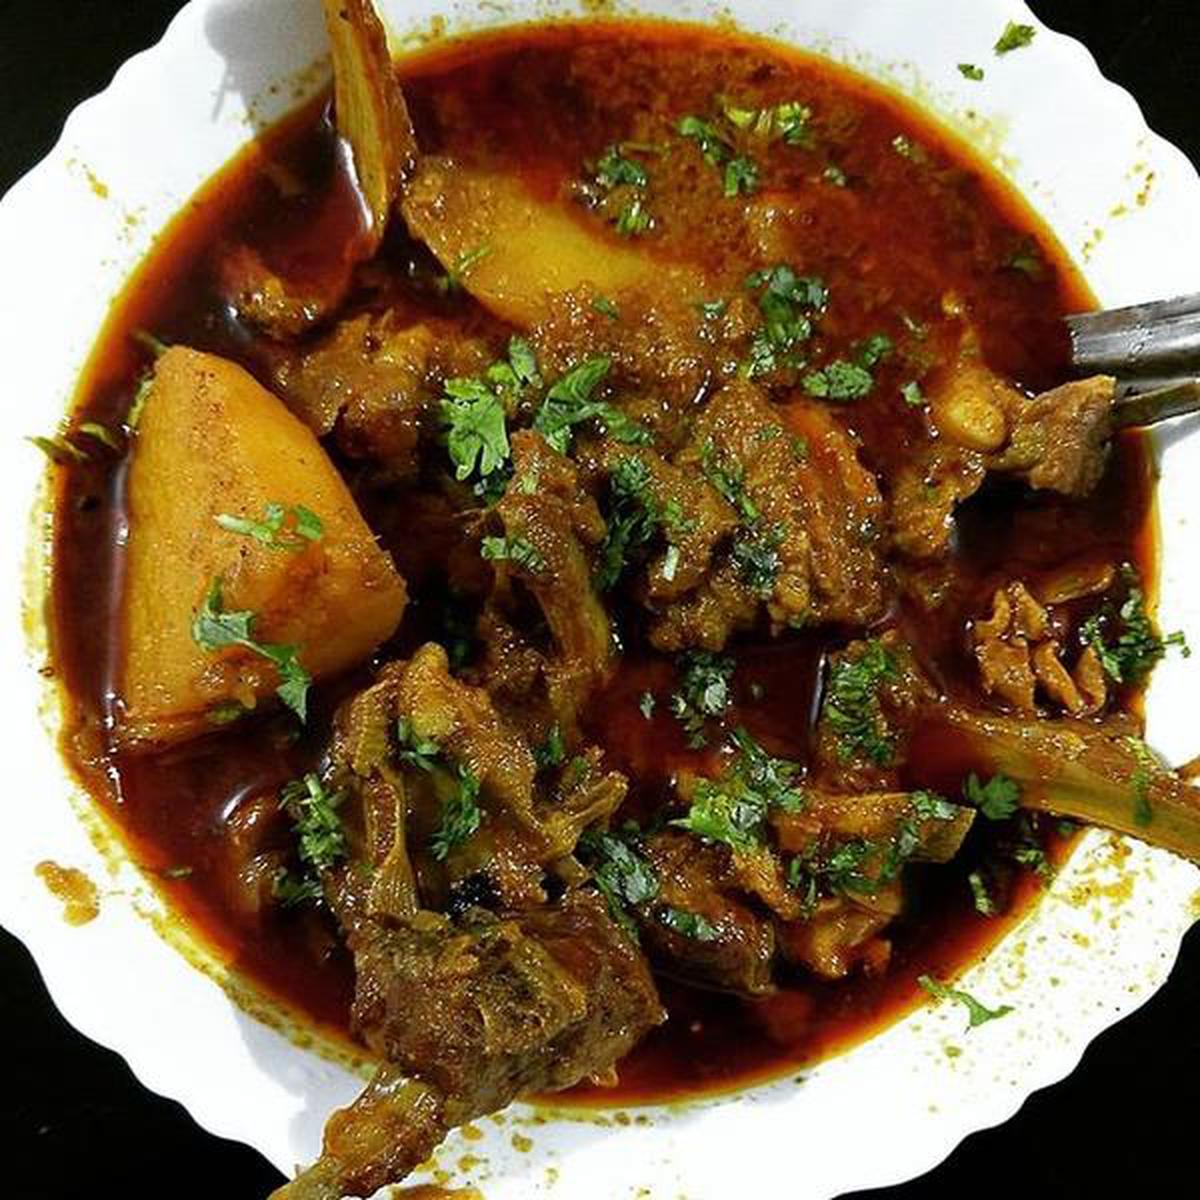 Baba’s Sunday mutton curry